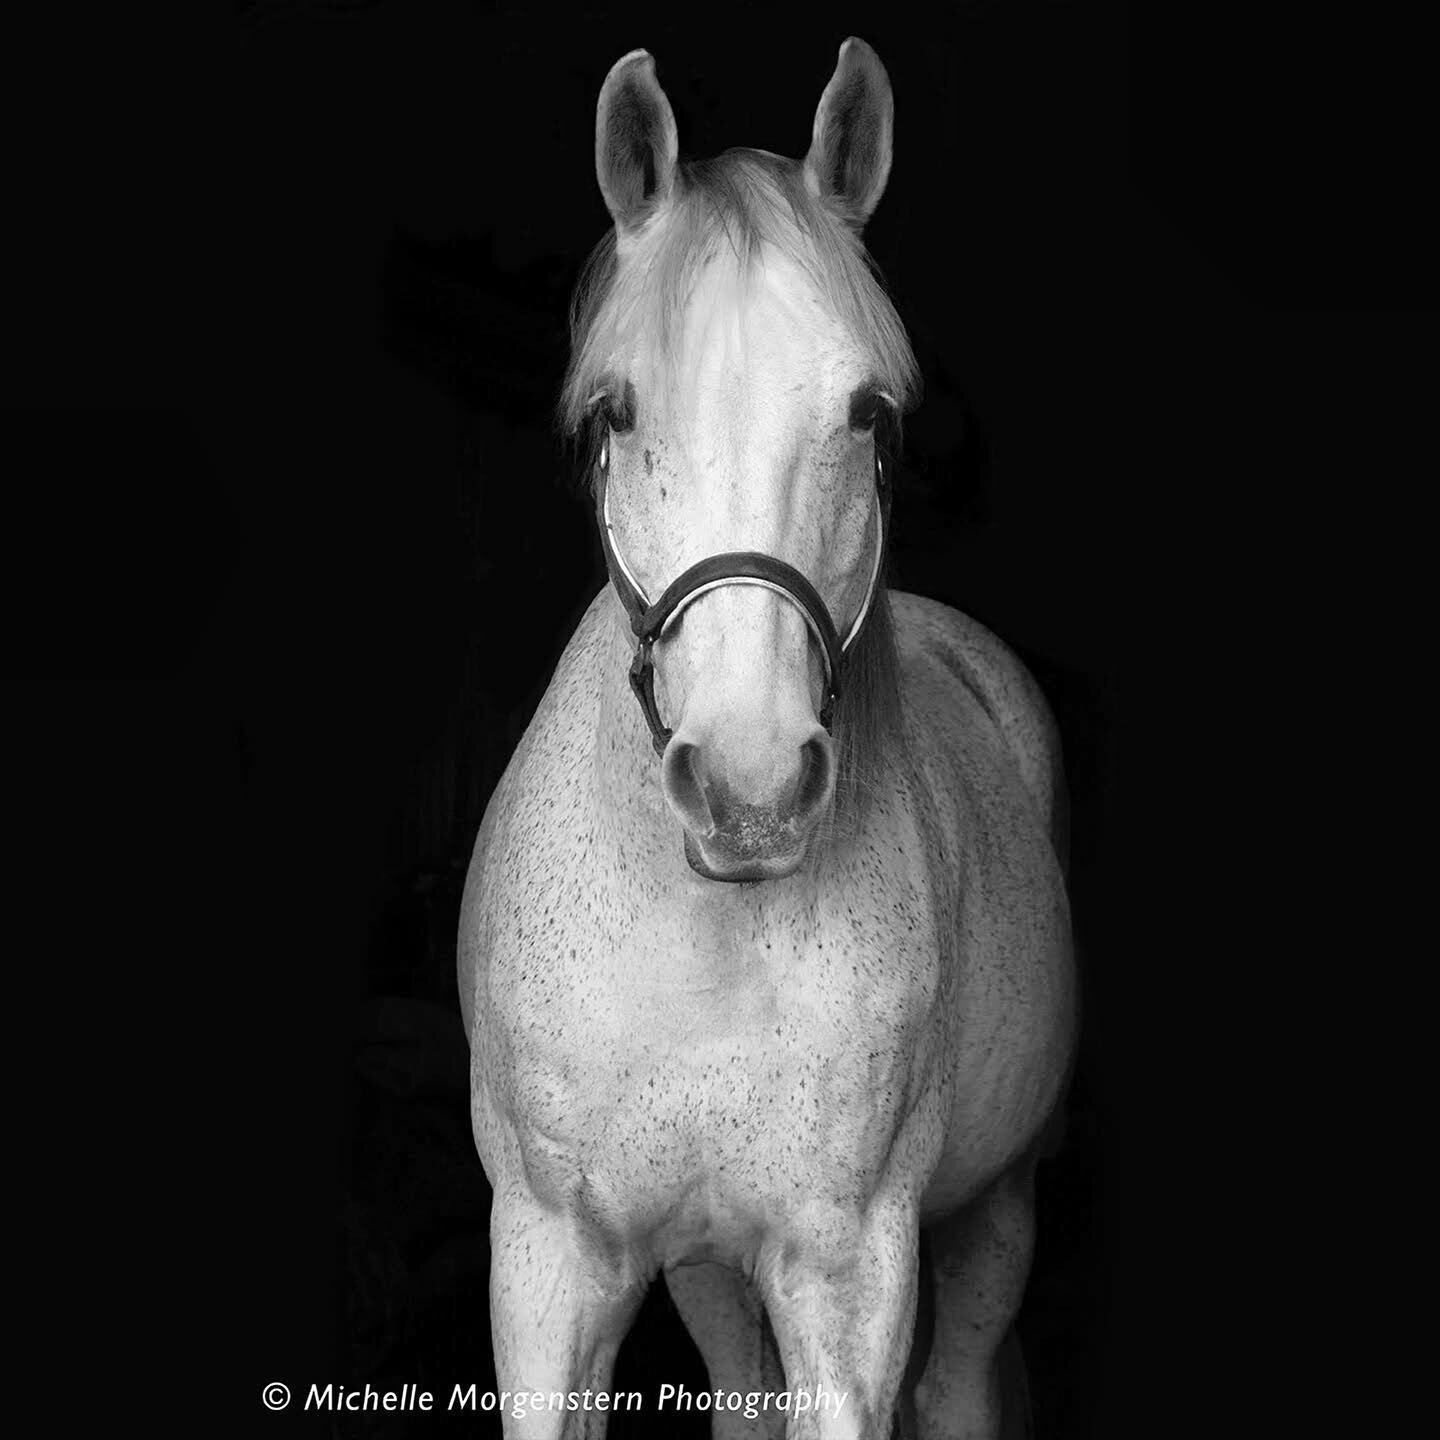 One of my favorite subjects to photograph. Contact me to book your black Backdrop Equine photoshoot!

&bull;
&bull;
&bull;
&bull;
&bull;
&bull;
&bull;
&bull;
&bull;
#michellemorgensternphotography #equinephotography #equinephotographer #equineportrai